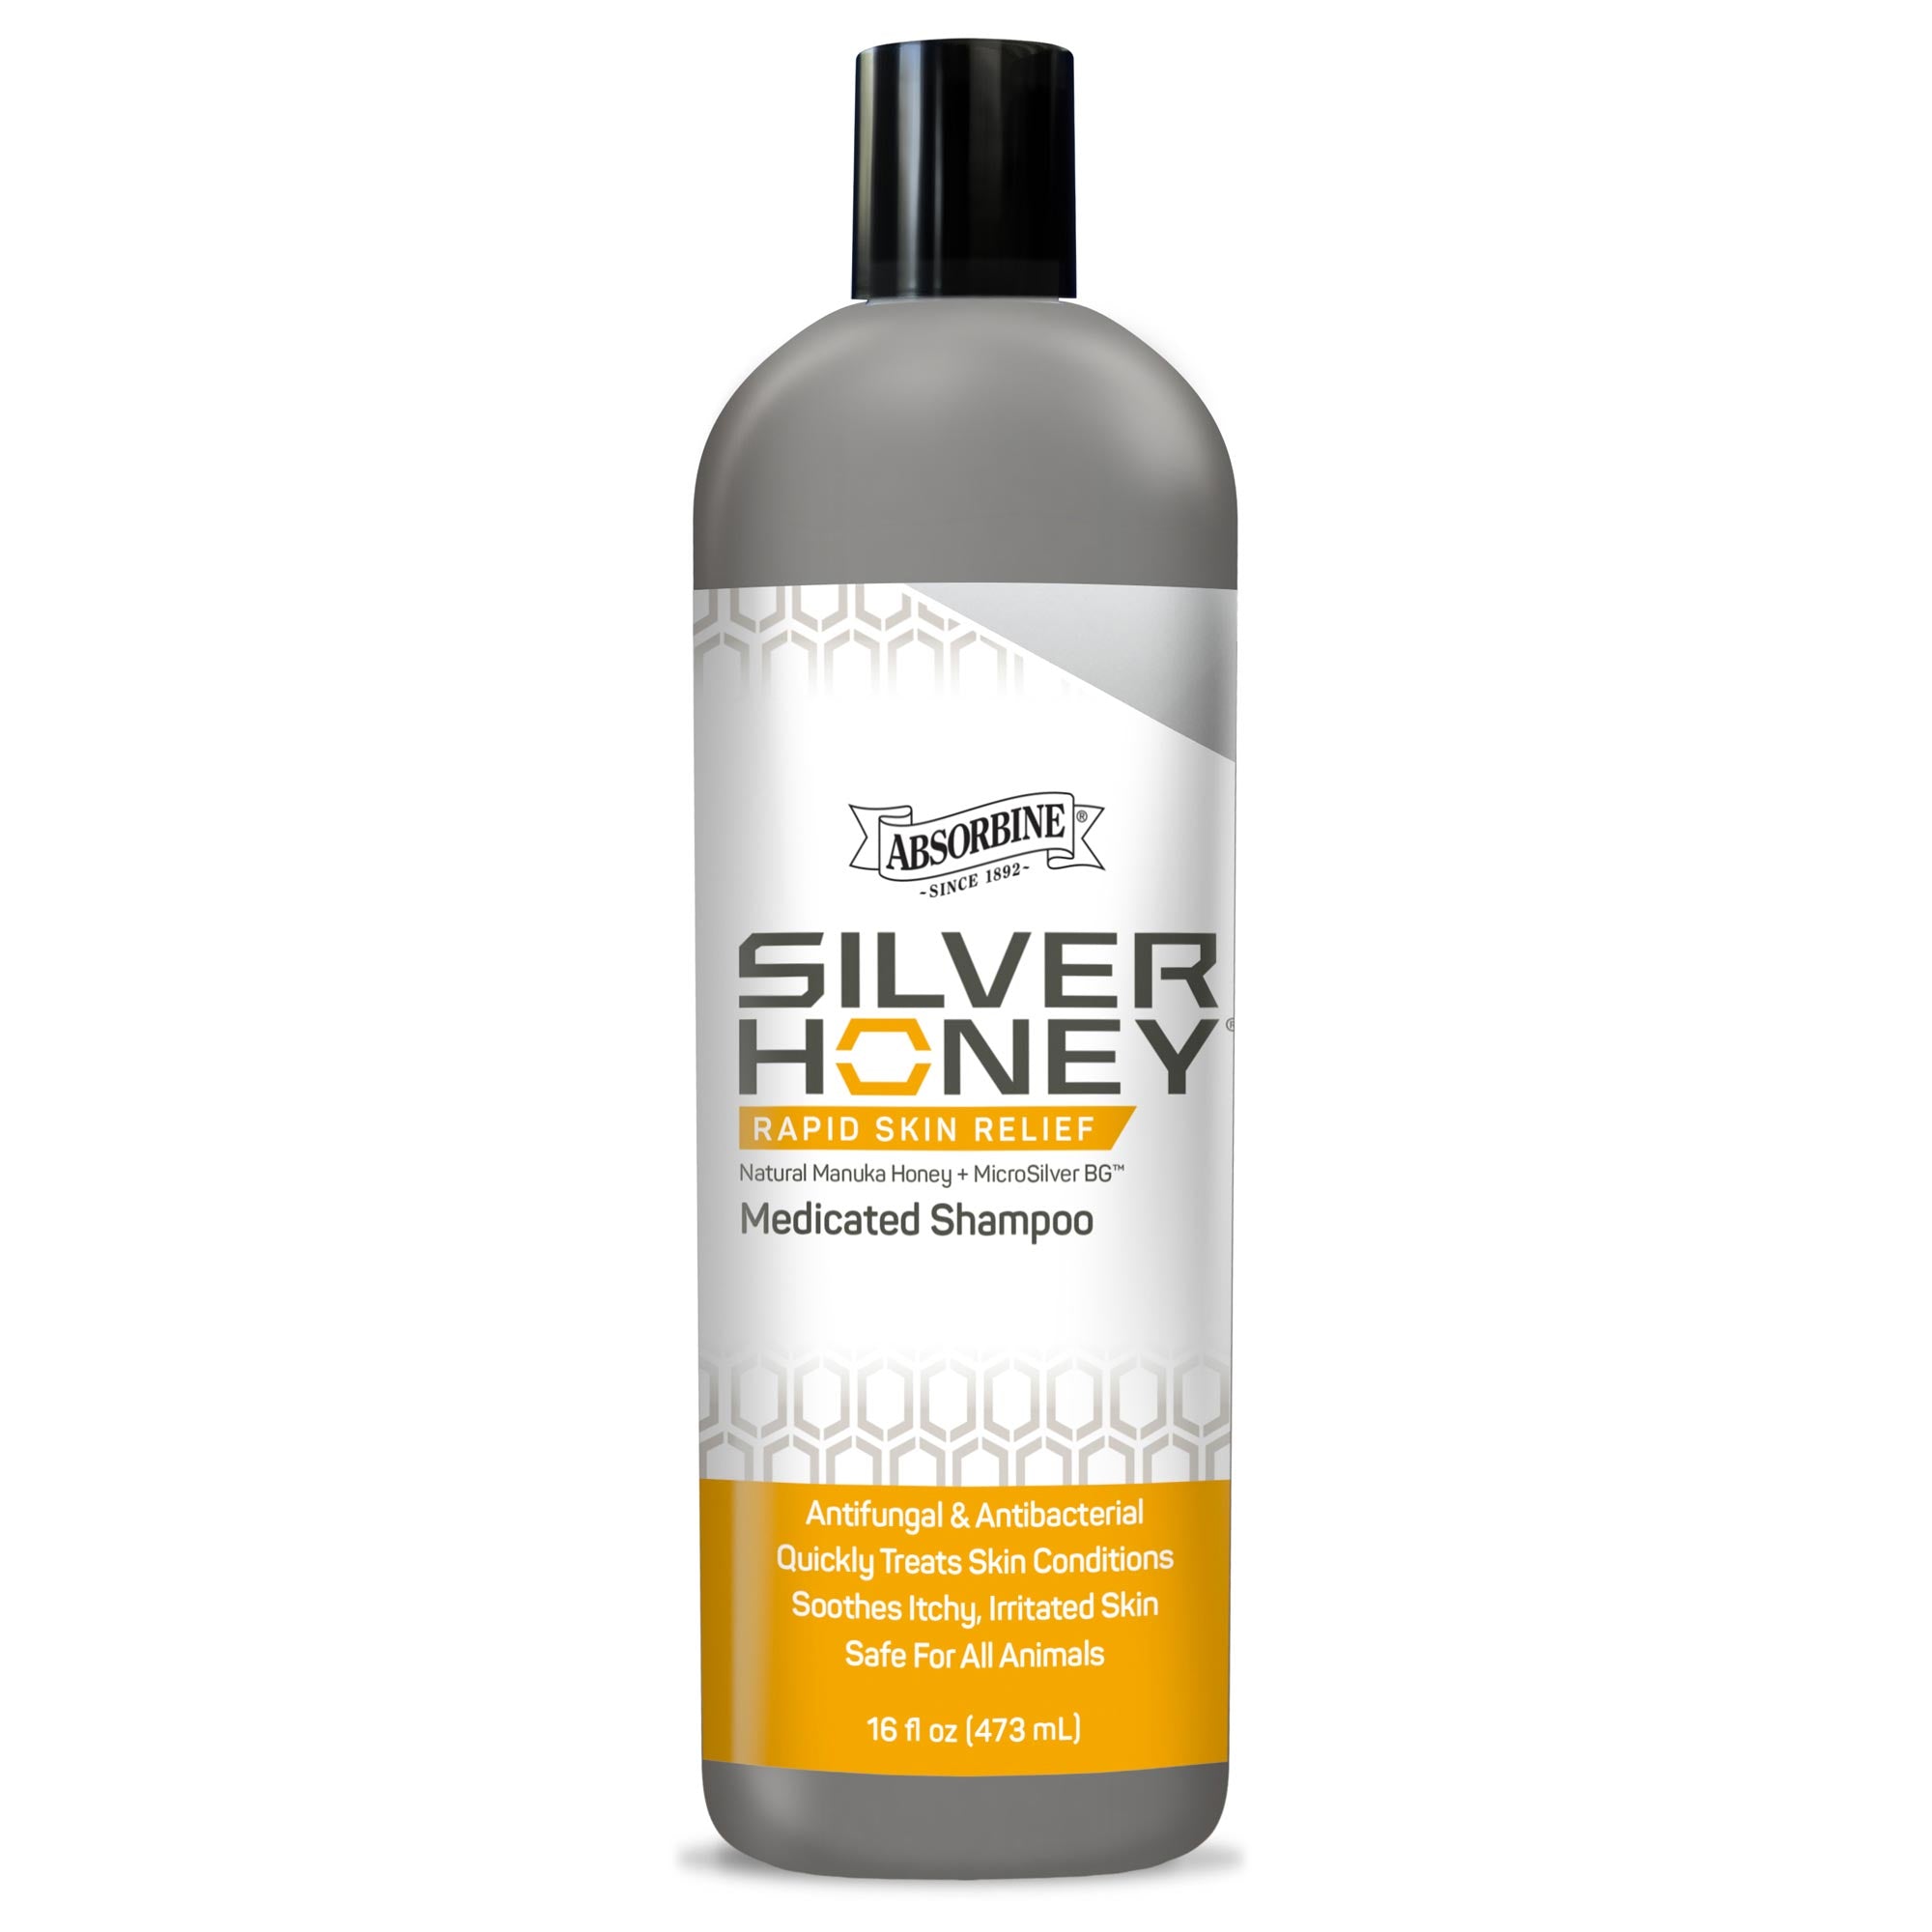 Silver honey rapid skin relief medicated shampoo.  Antifungal & antibacterial.  Quickly treats skin conditions, sooths itchy, irritated skin.  Safe for all animals.